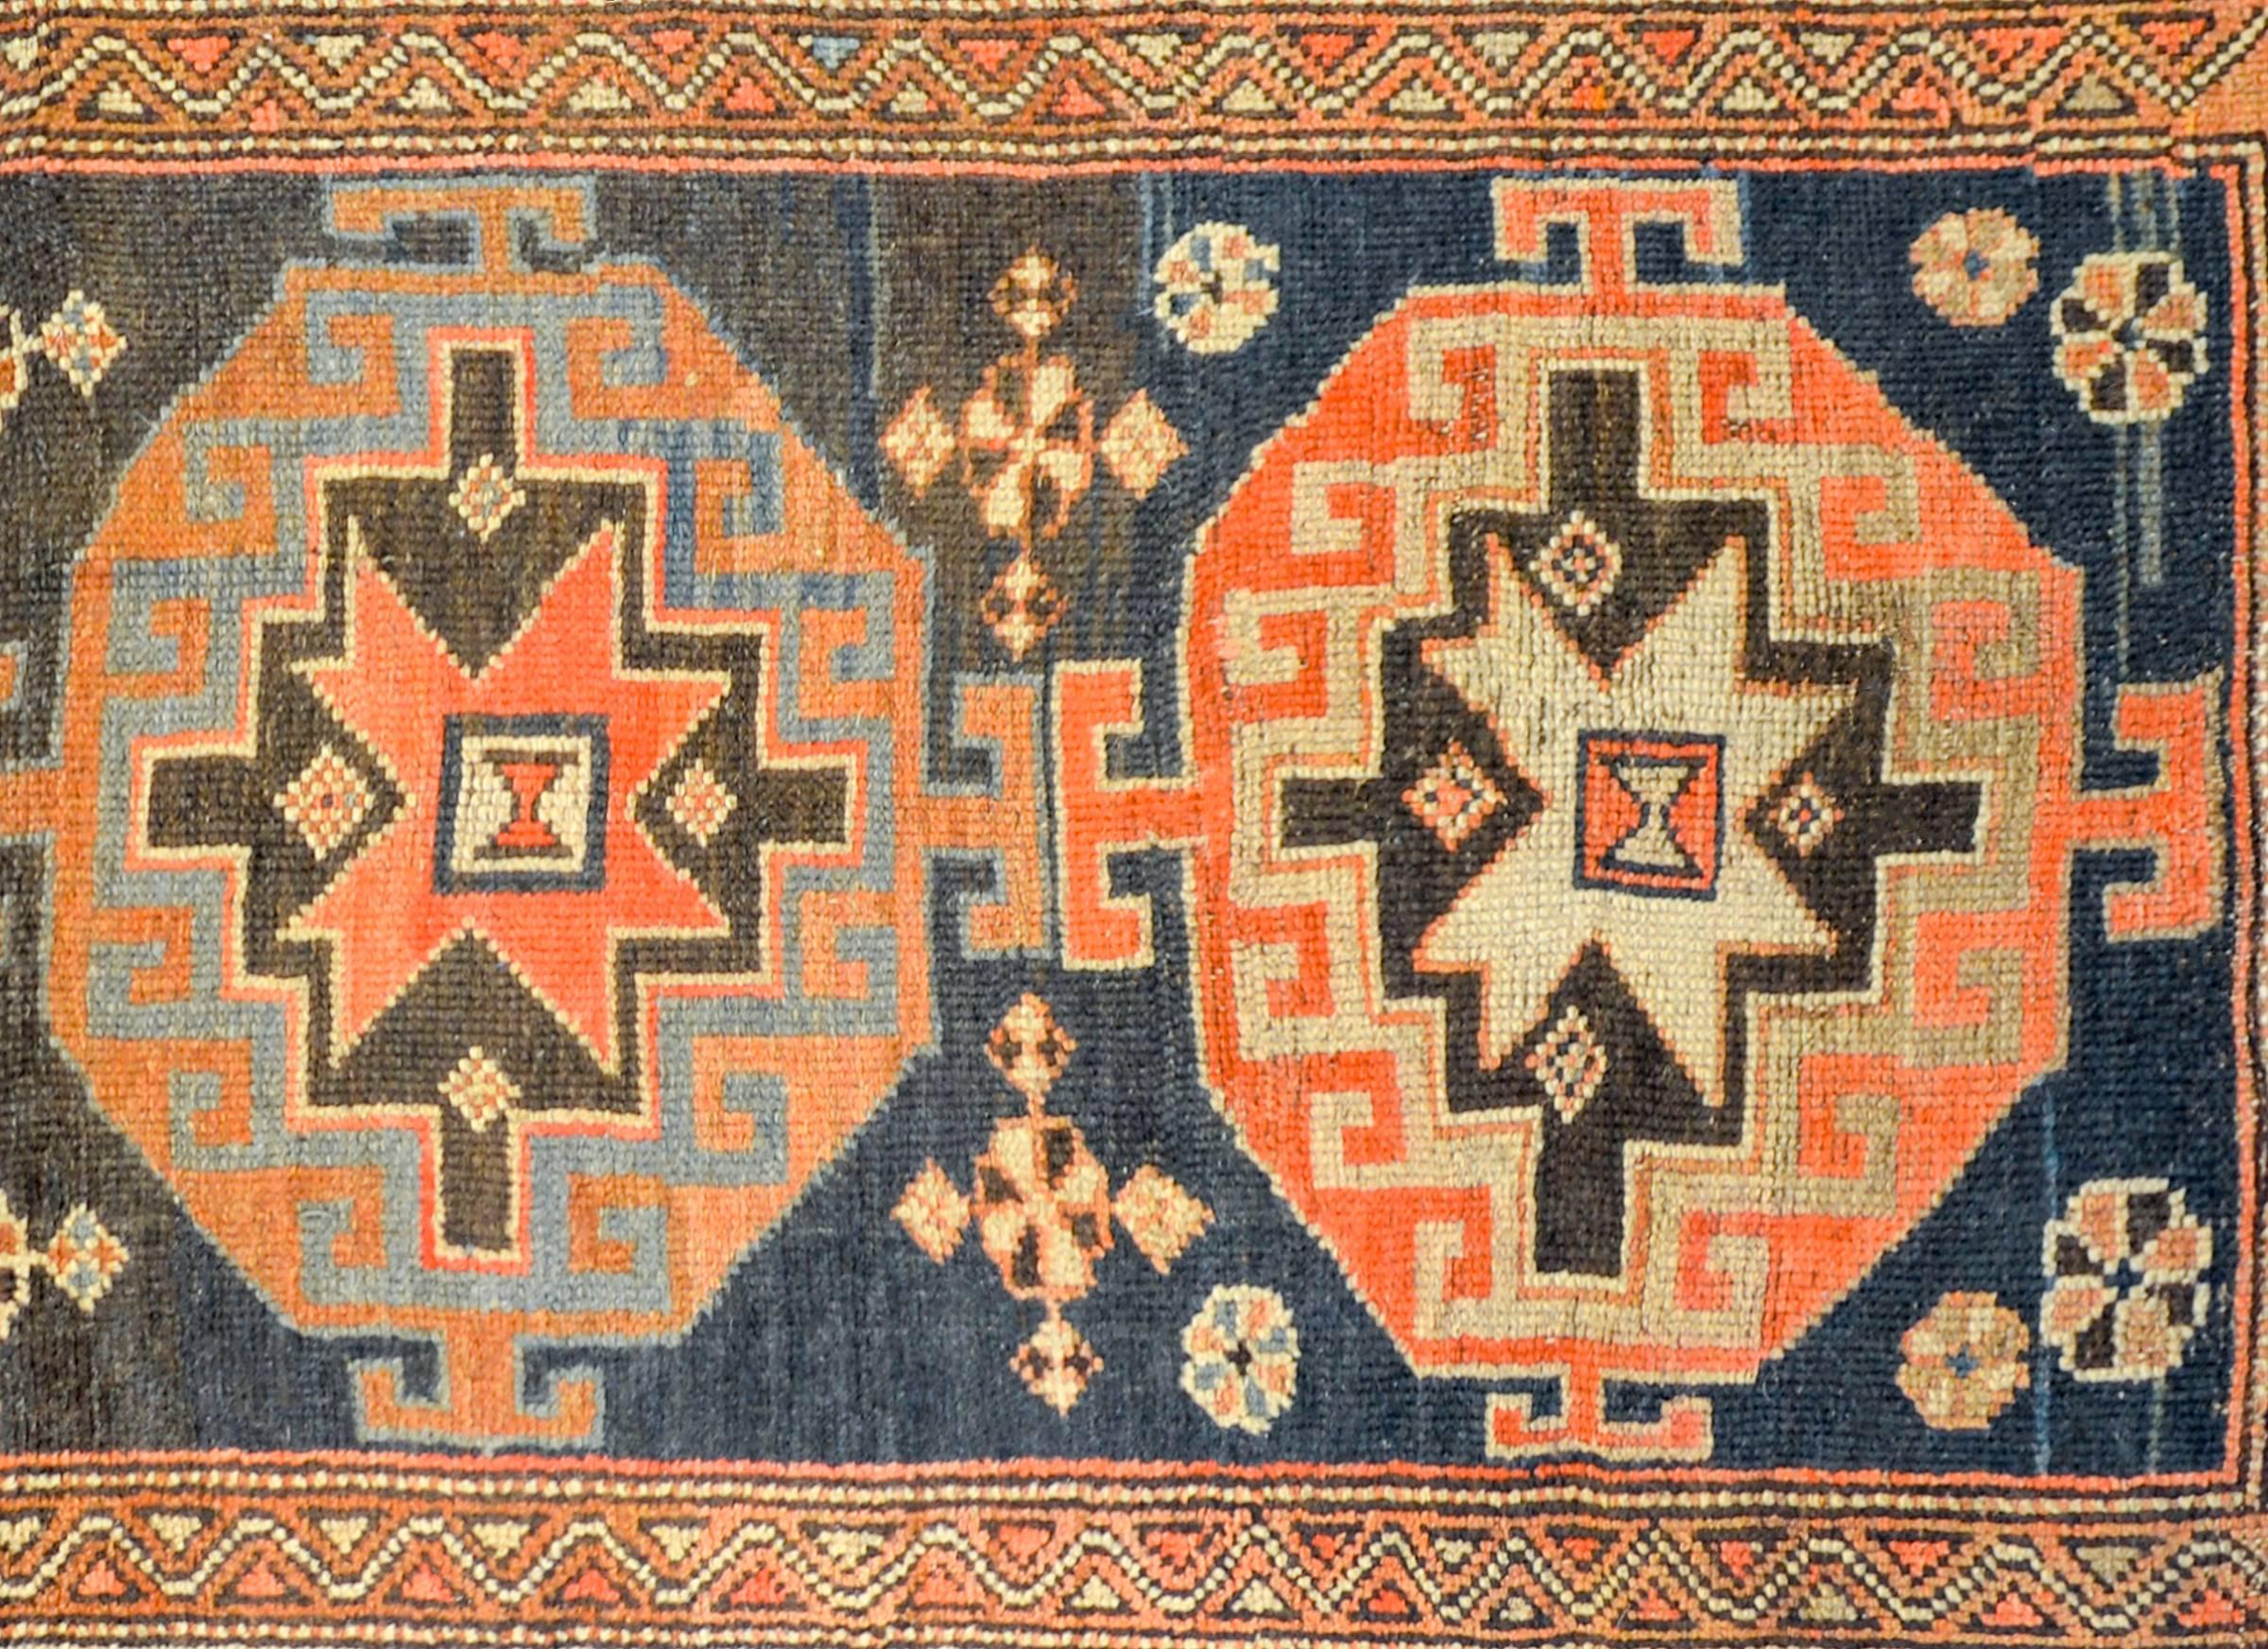 A beautiful early 20th century Persian Karebak rug with four large octagonal medallions, each woven in alternating colors of crimson, indigo, brown, and natural wool, on a wonderful deep indigo field of stylized flowers. The border is complex, with